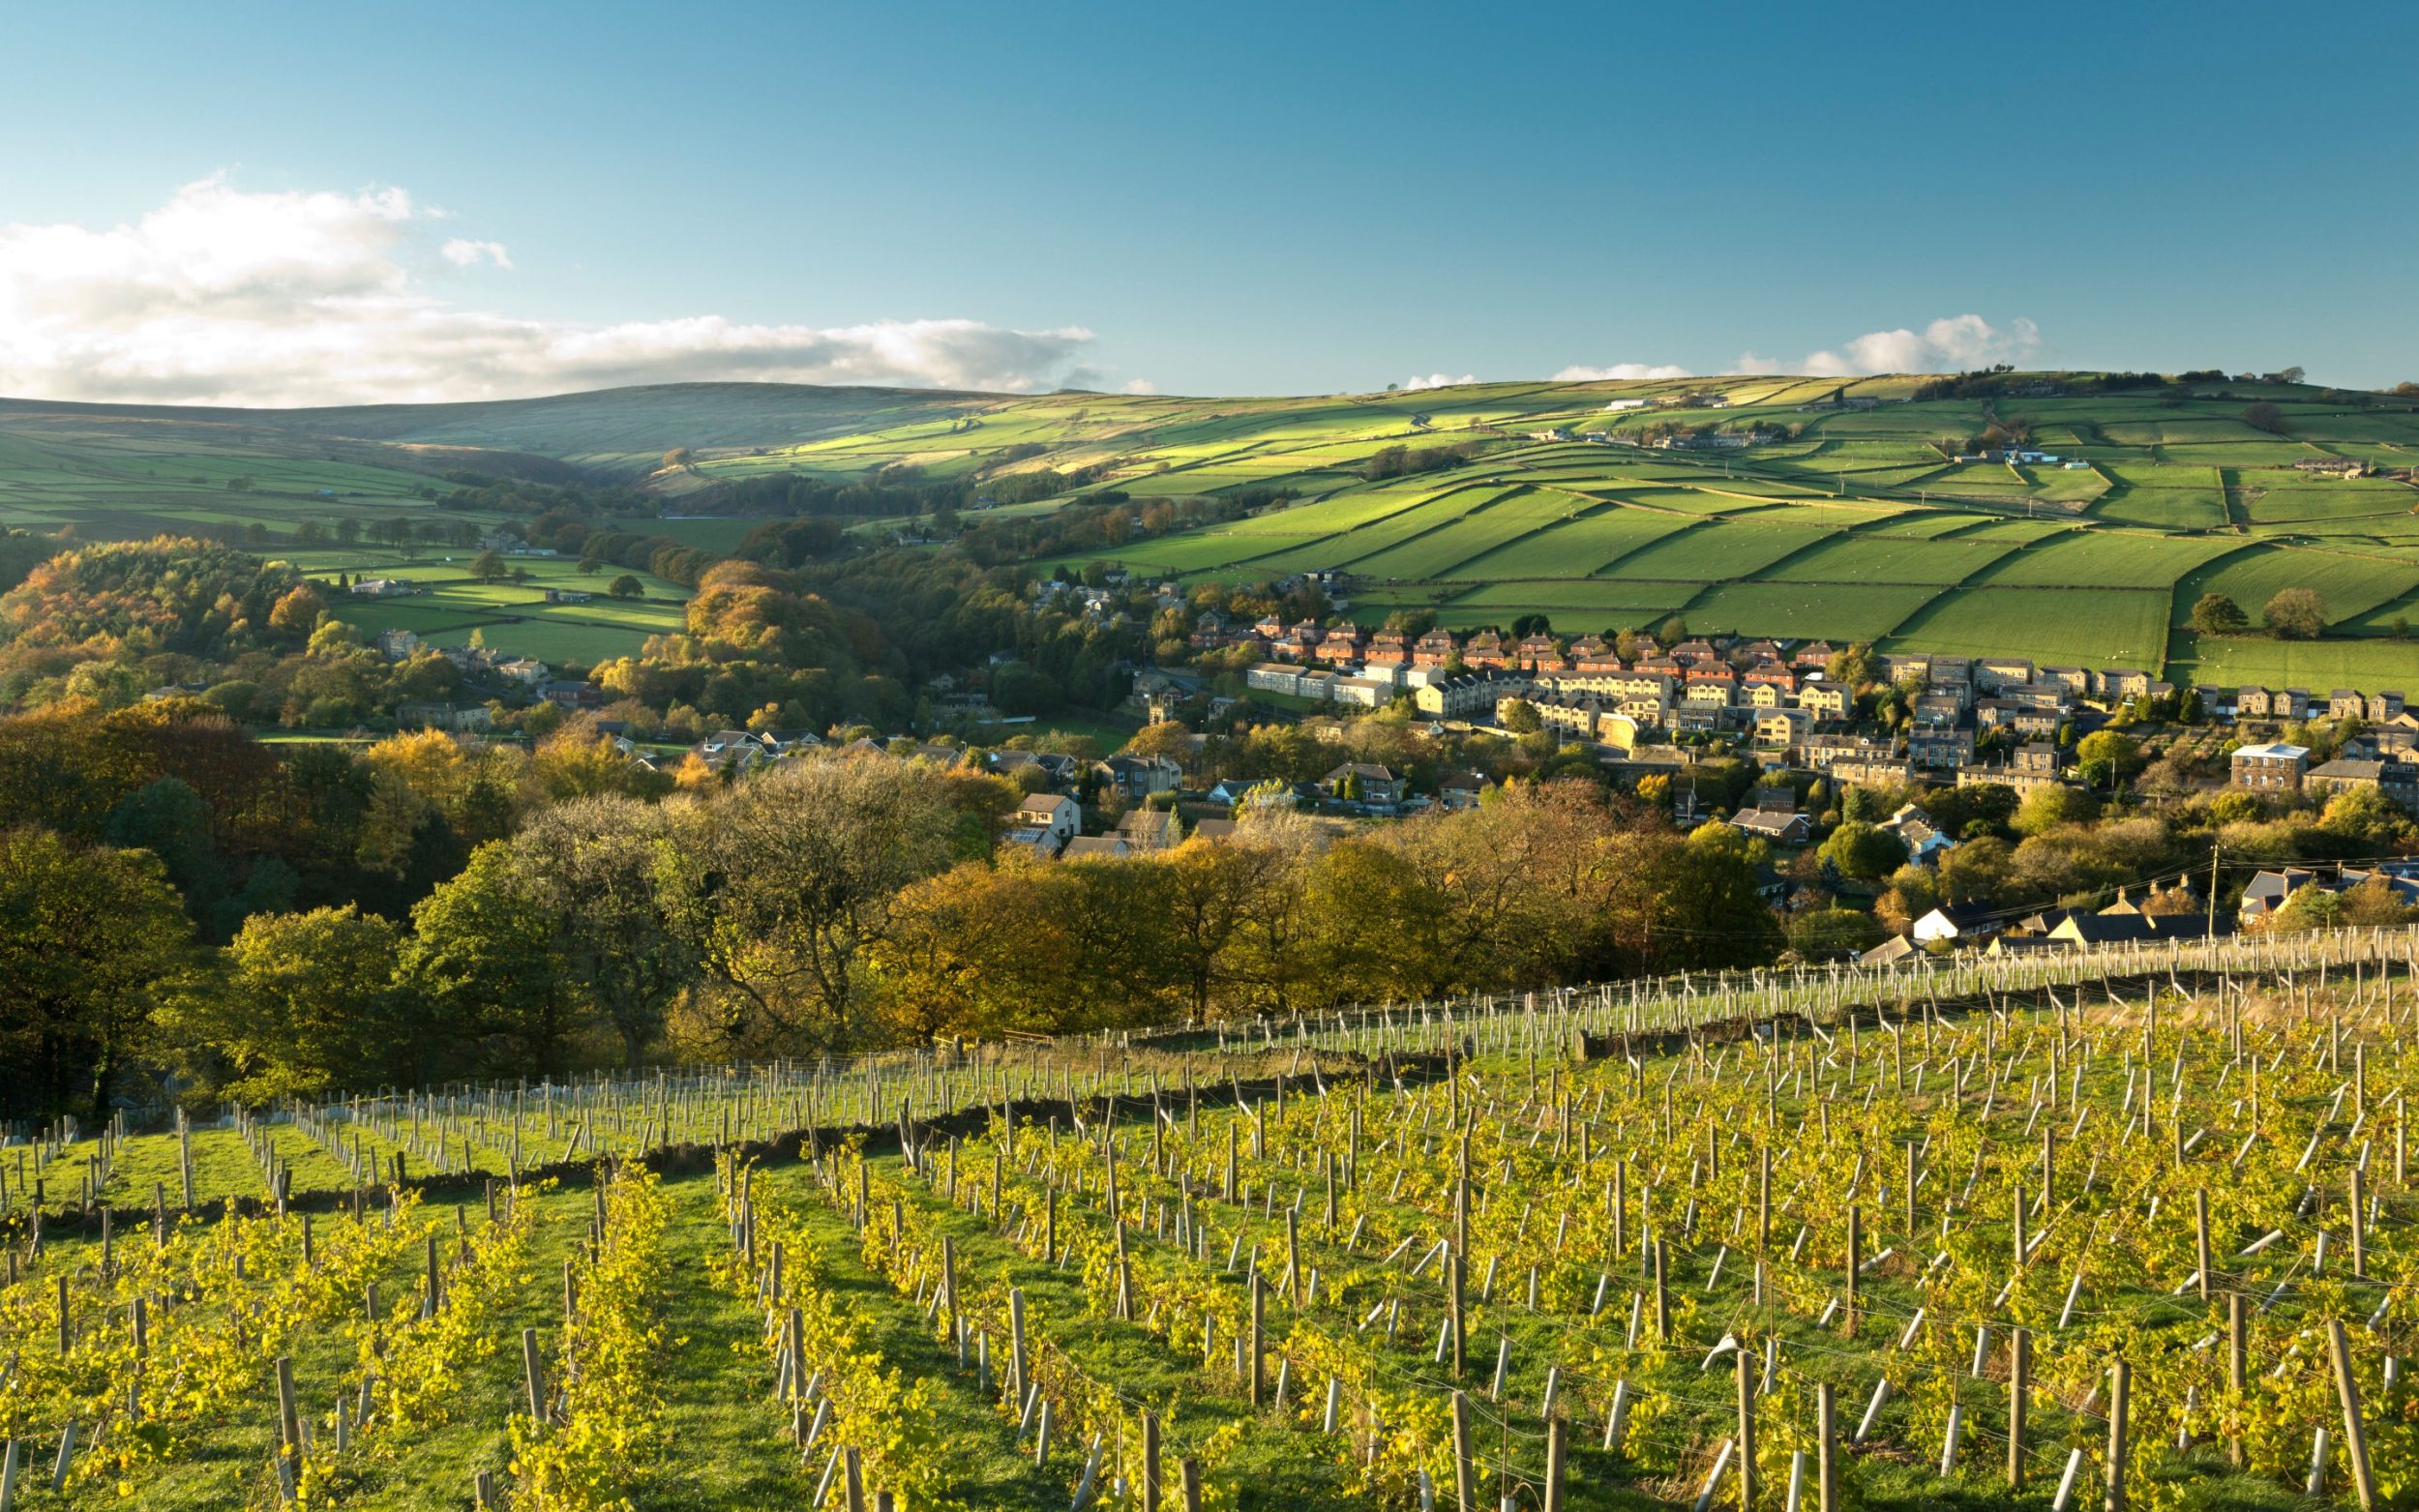 wines from the north of england and scotland are the future, french experts say